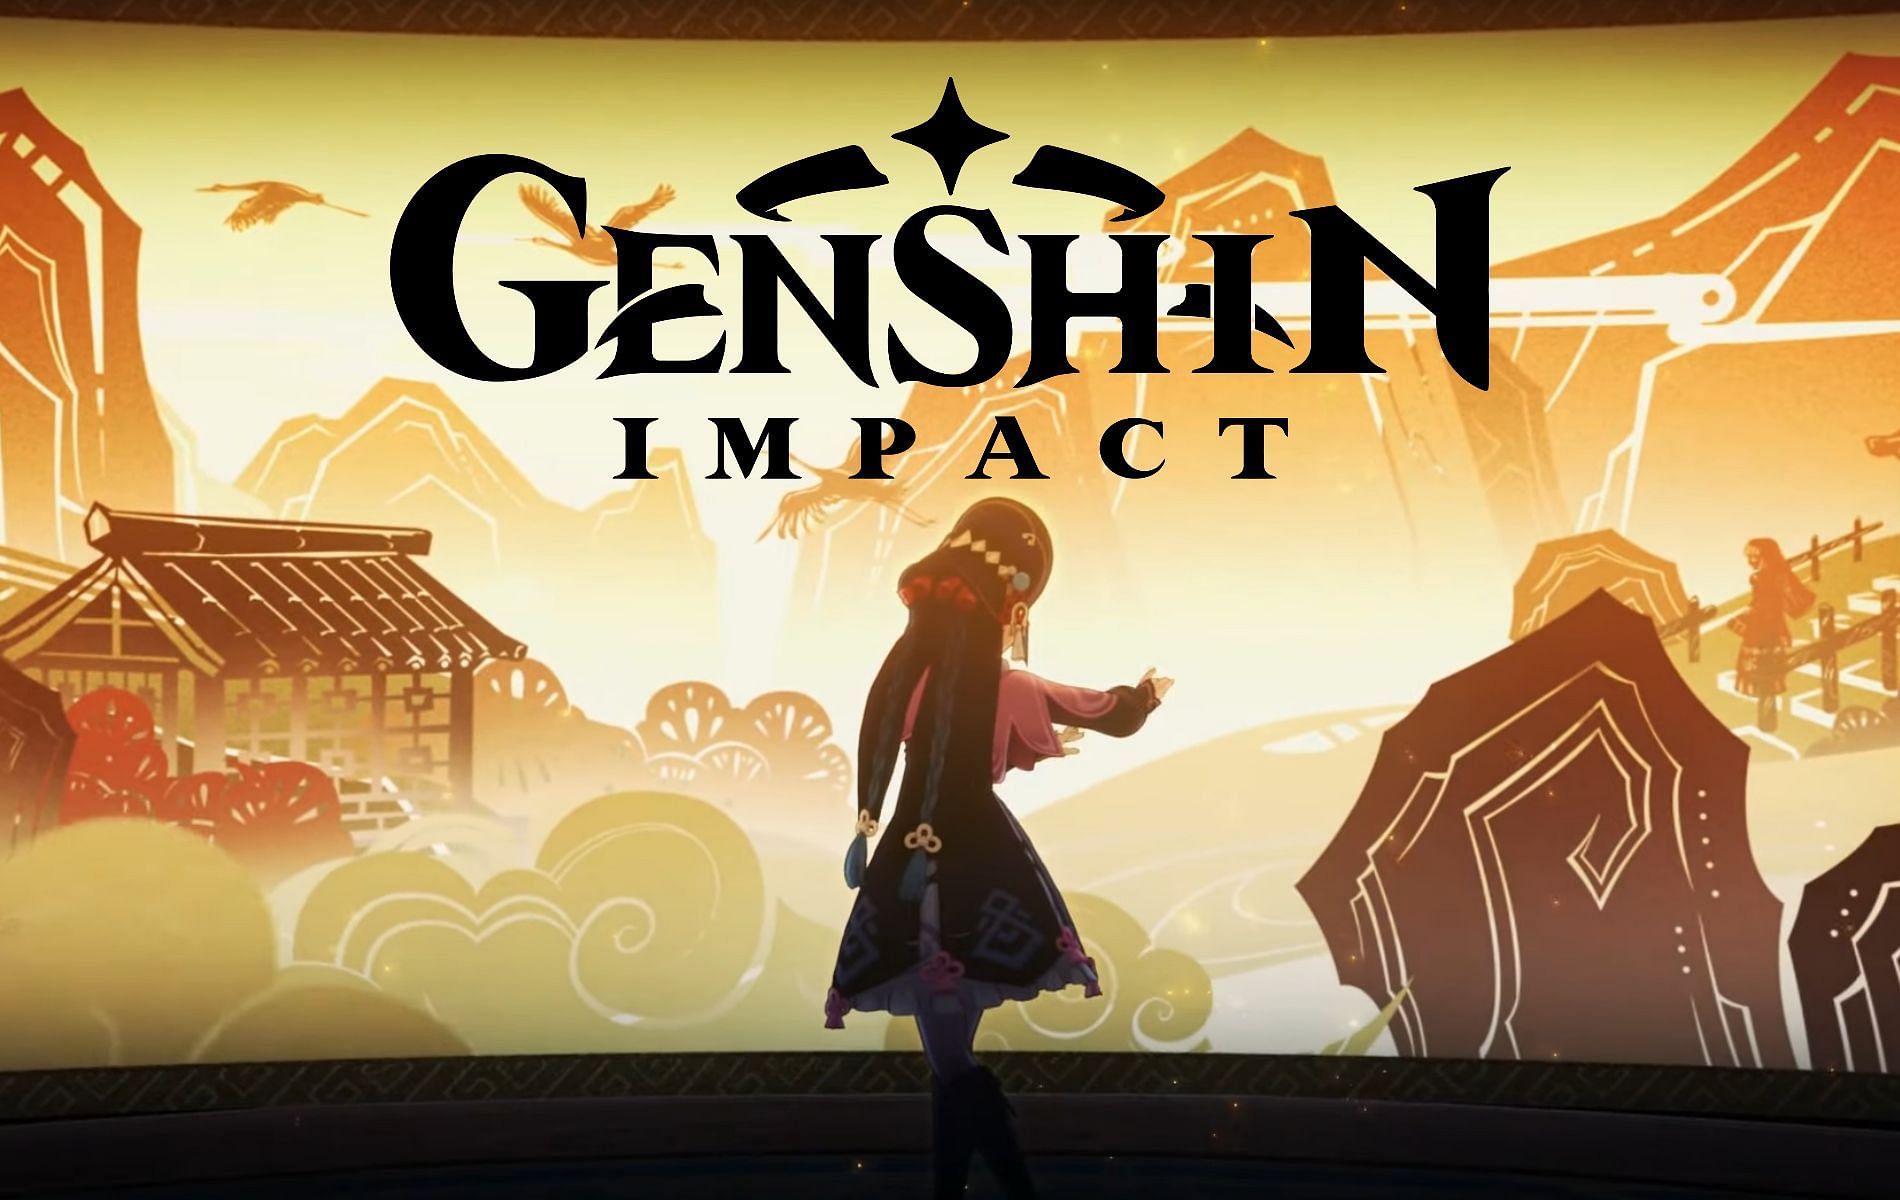 Genshin Impact 2.4 update release date, expected maintenance time, and expected banners - News Update